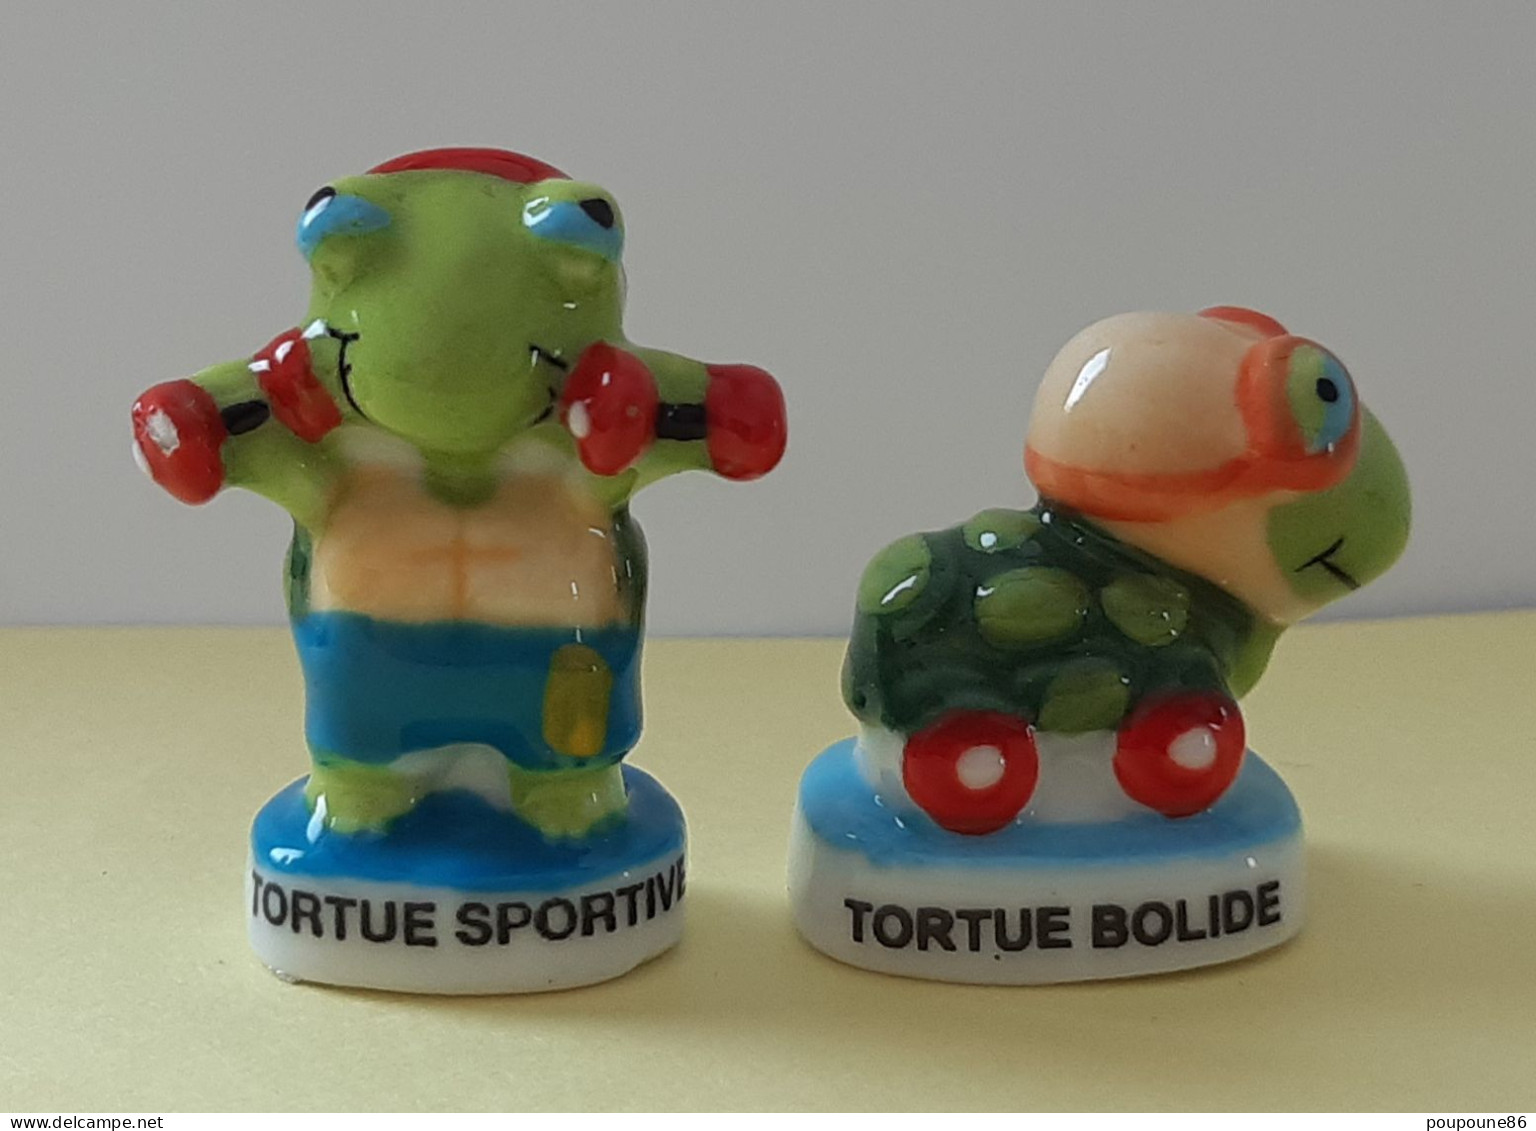 FEVE FEVES - "LES TORTUES 2018" - LOT DE 2 - TORTUE SPORTIVE & TORTUE  BOLIDE - Animaux